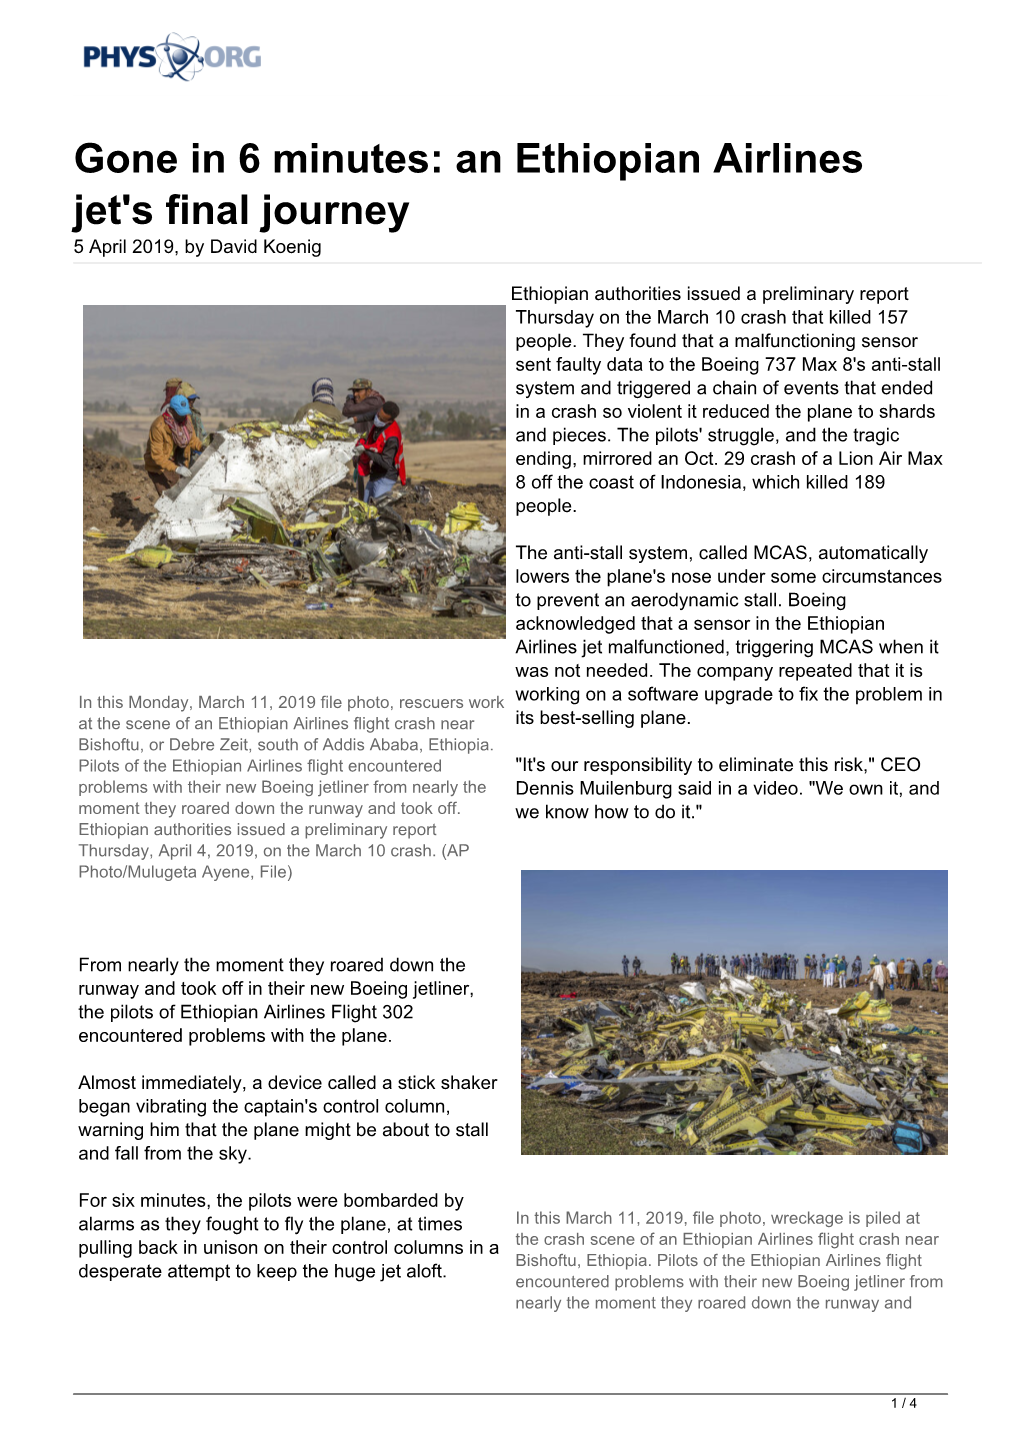 Gone in 6 Minutes: an Ethiopian Airlines Jet's Final Journey 5 April 2019, by David Koenig